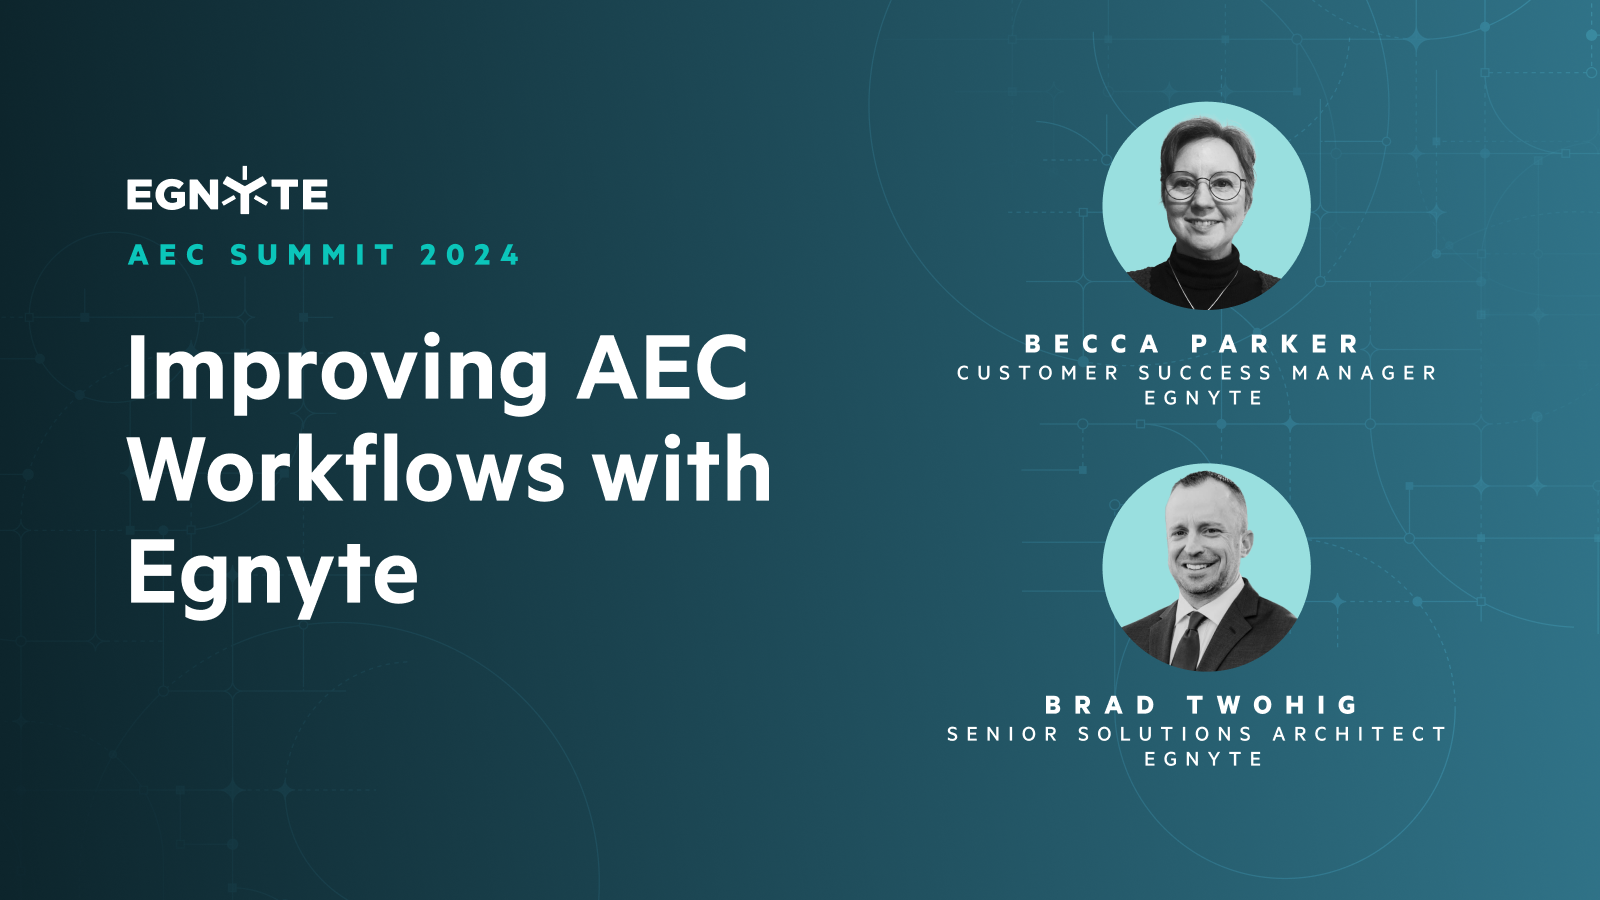 Improving AEC Workflows with Egnyte